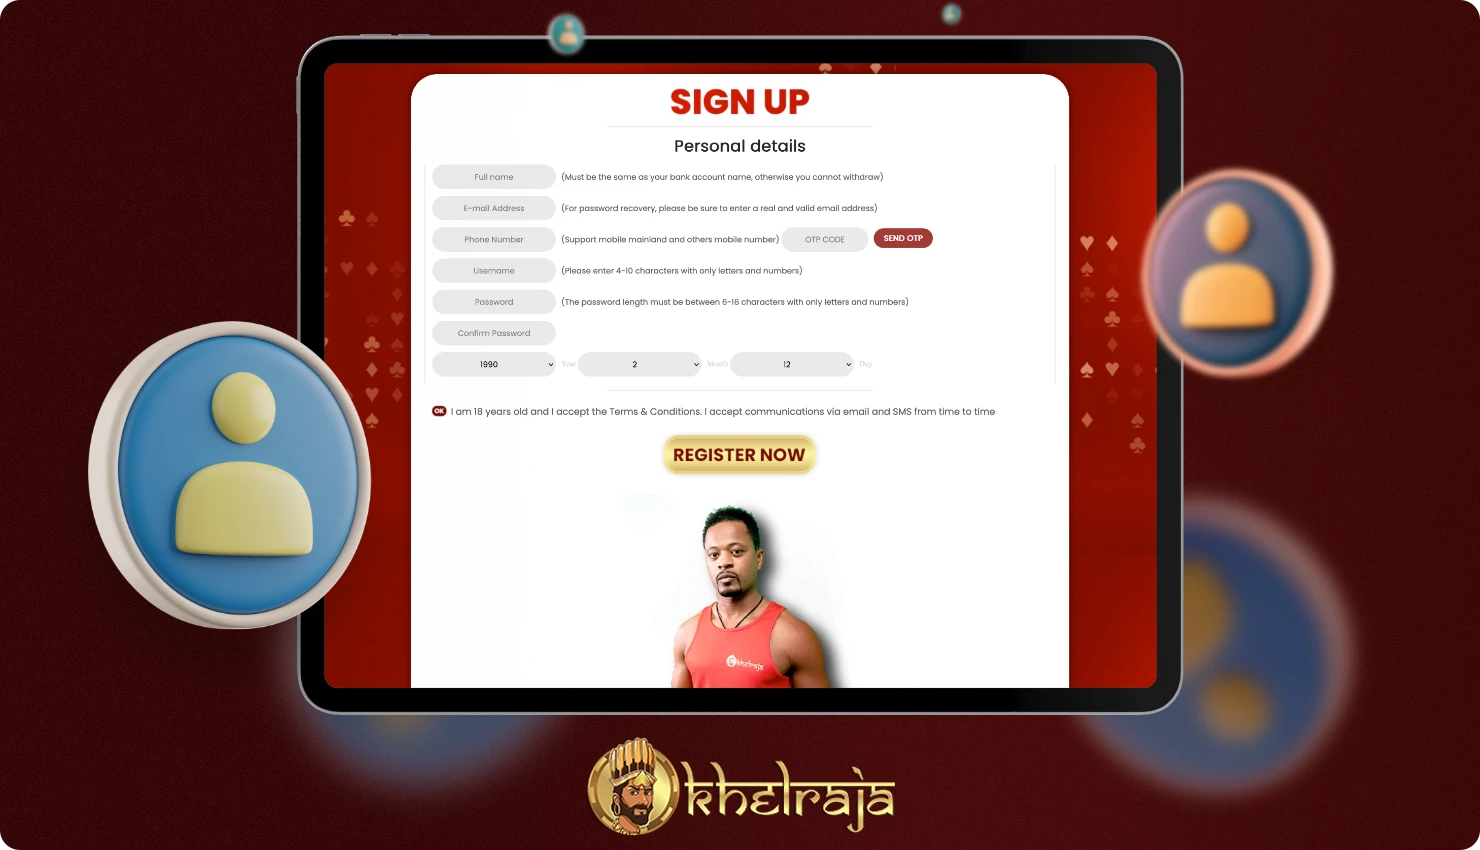 All Khelraja customers need to create an account and verify it to get access to all platform features